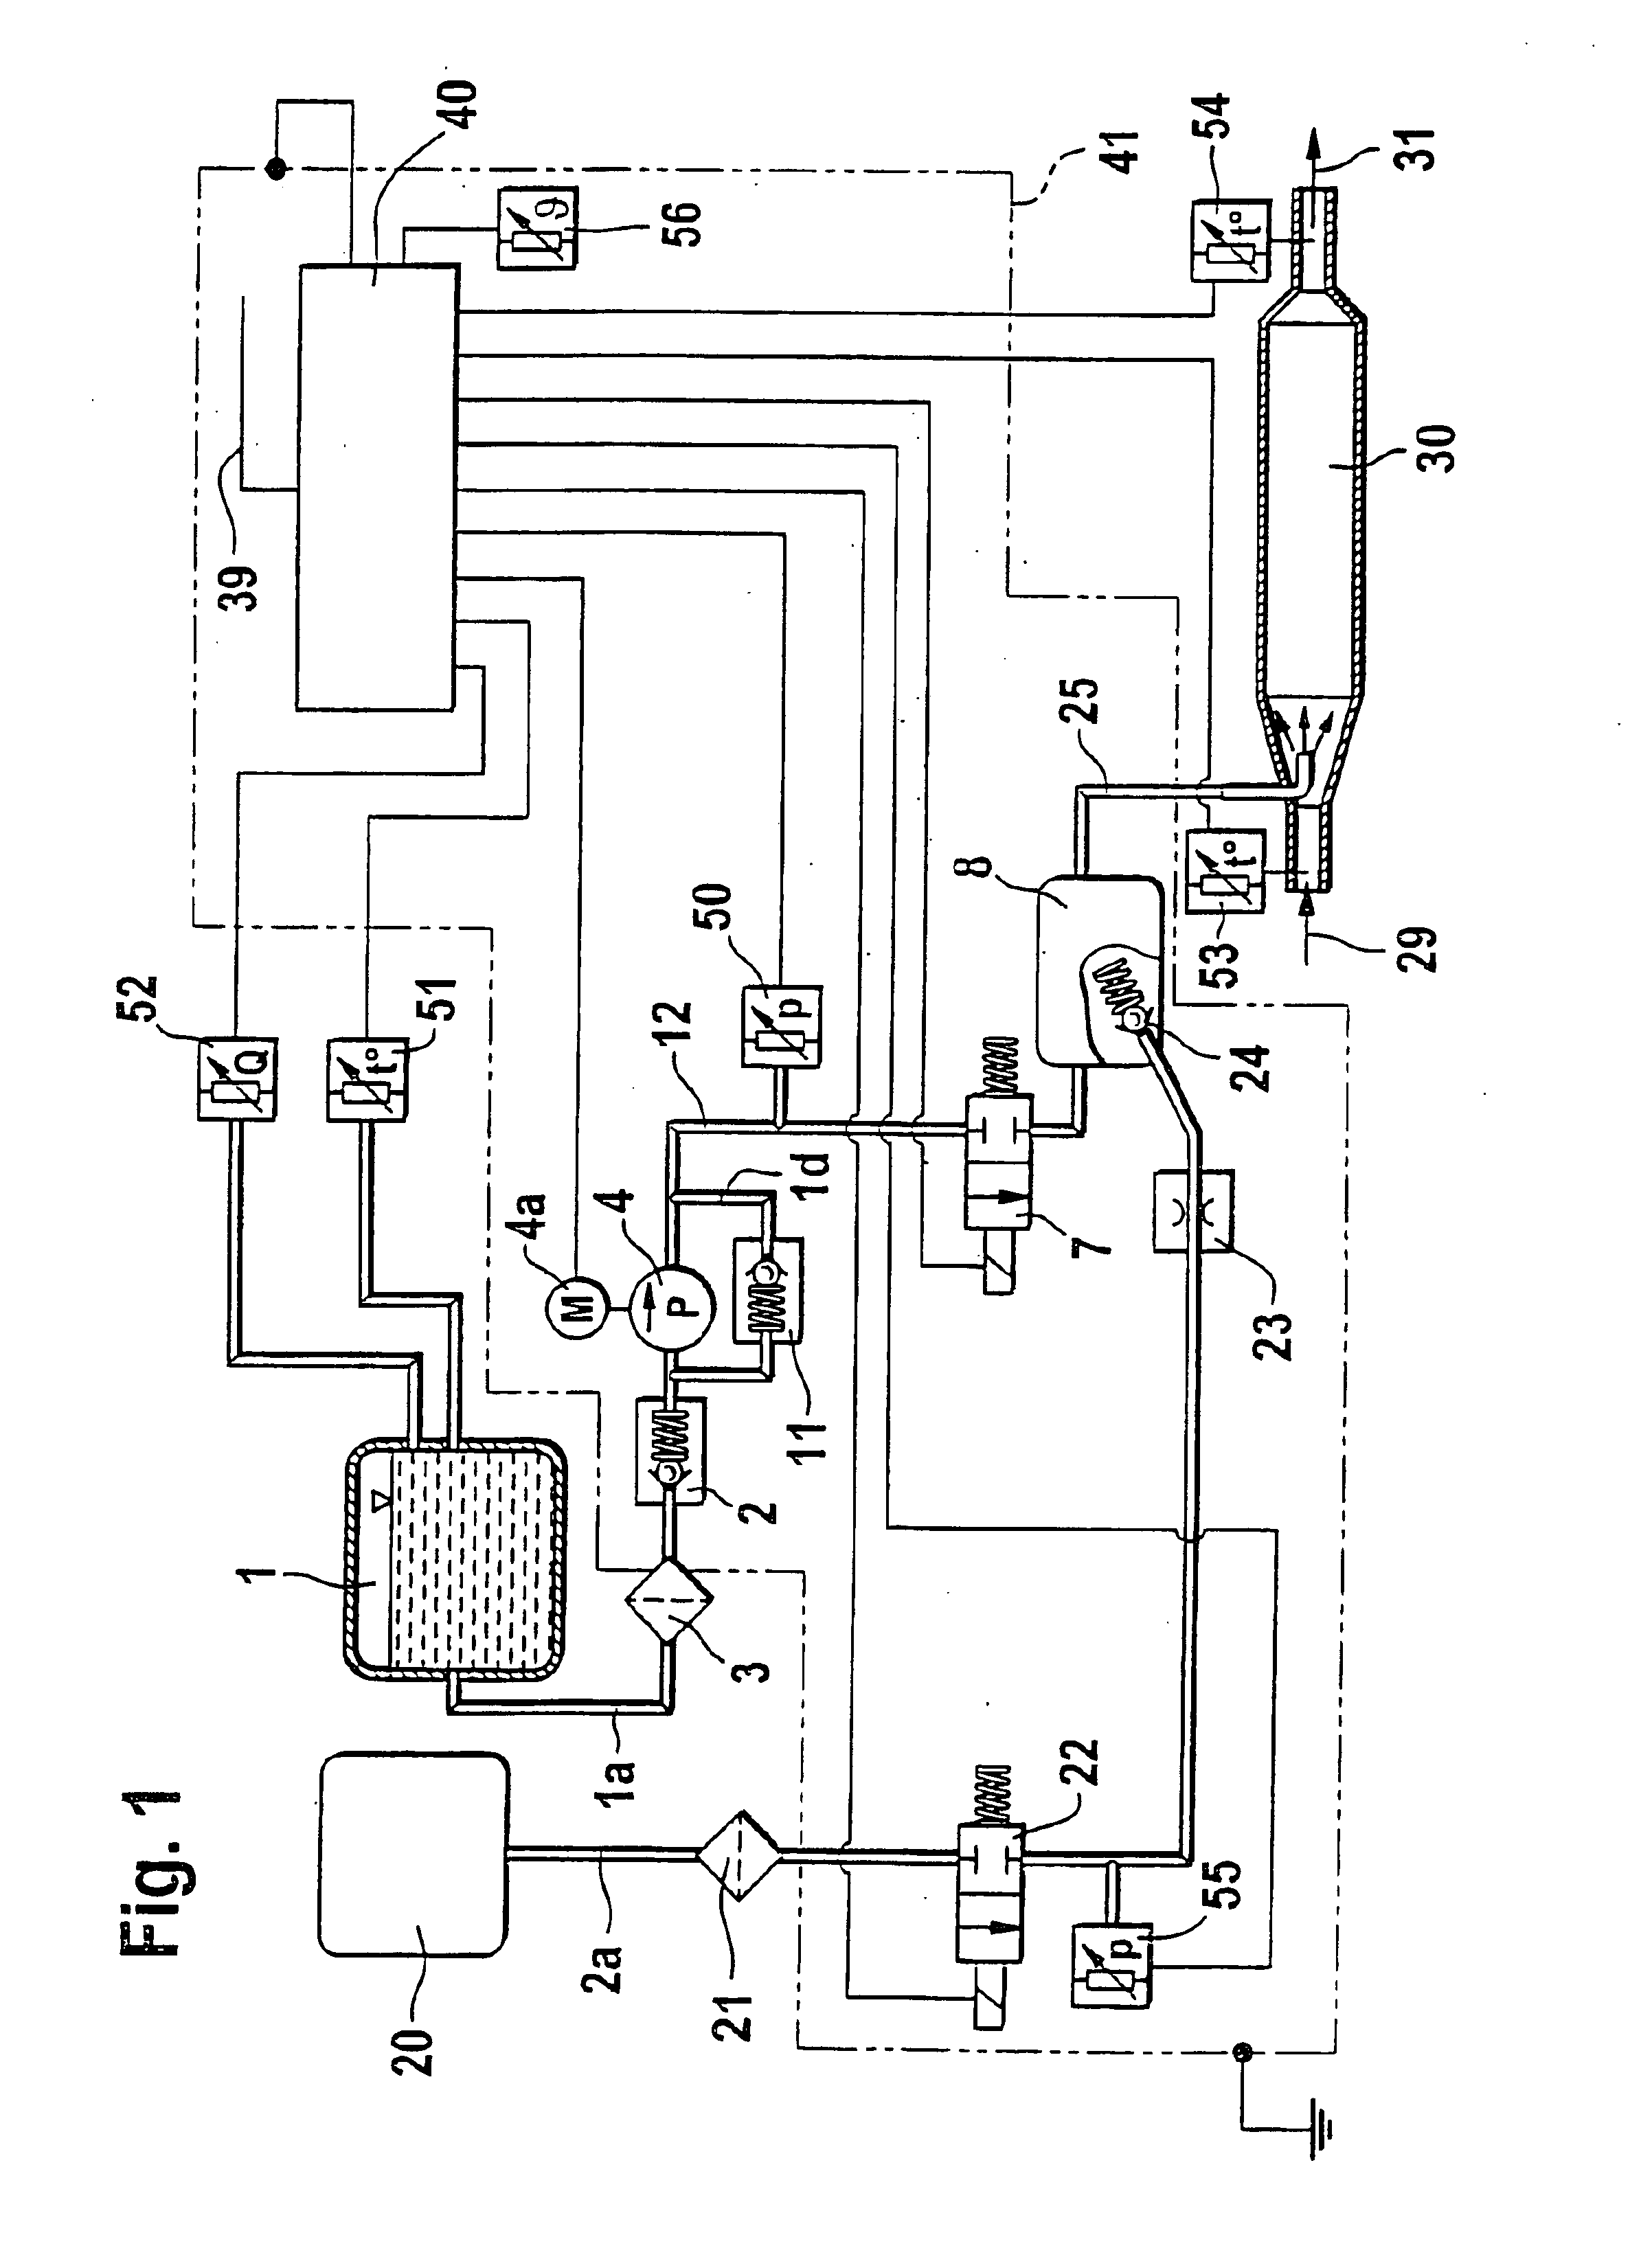 Method and apparatus for metering a reducing agent for removing nitrogen oxides from exhaust gases